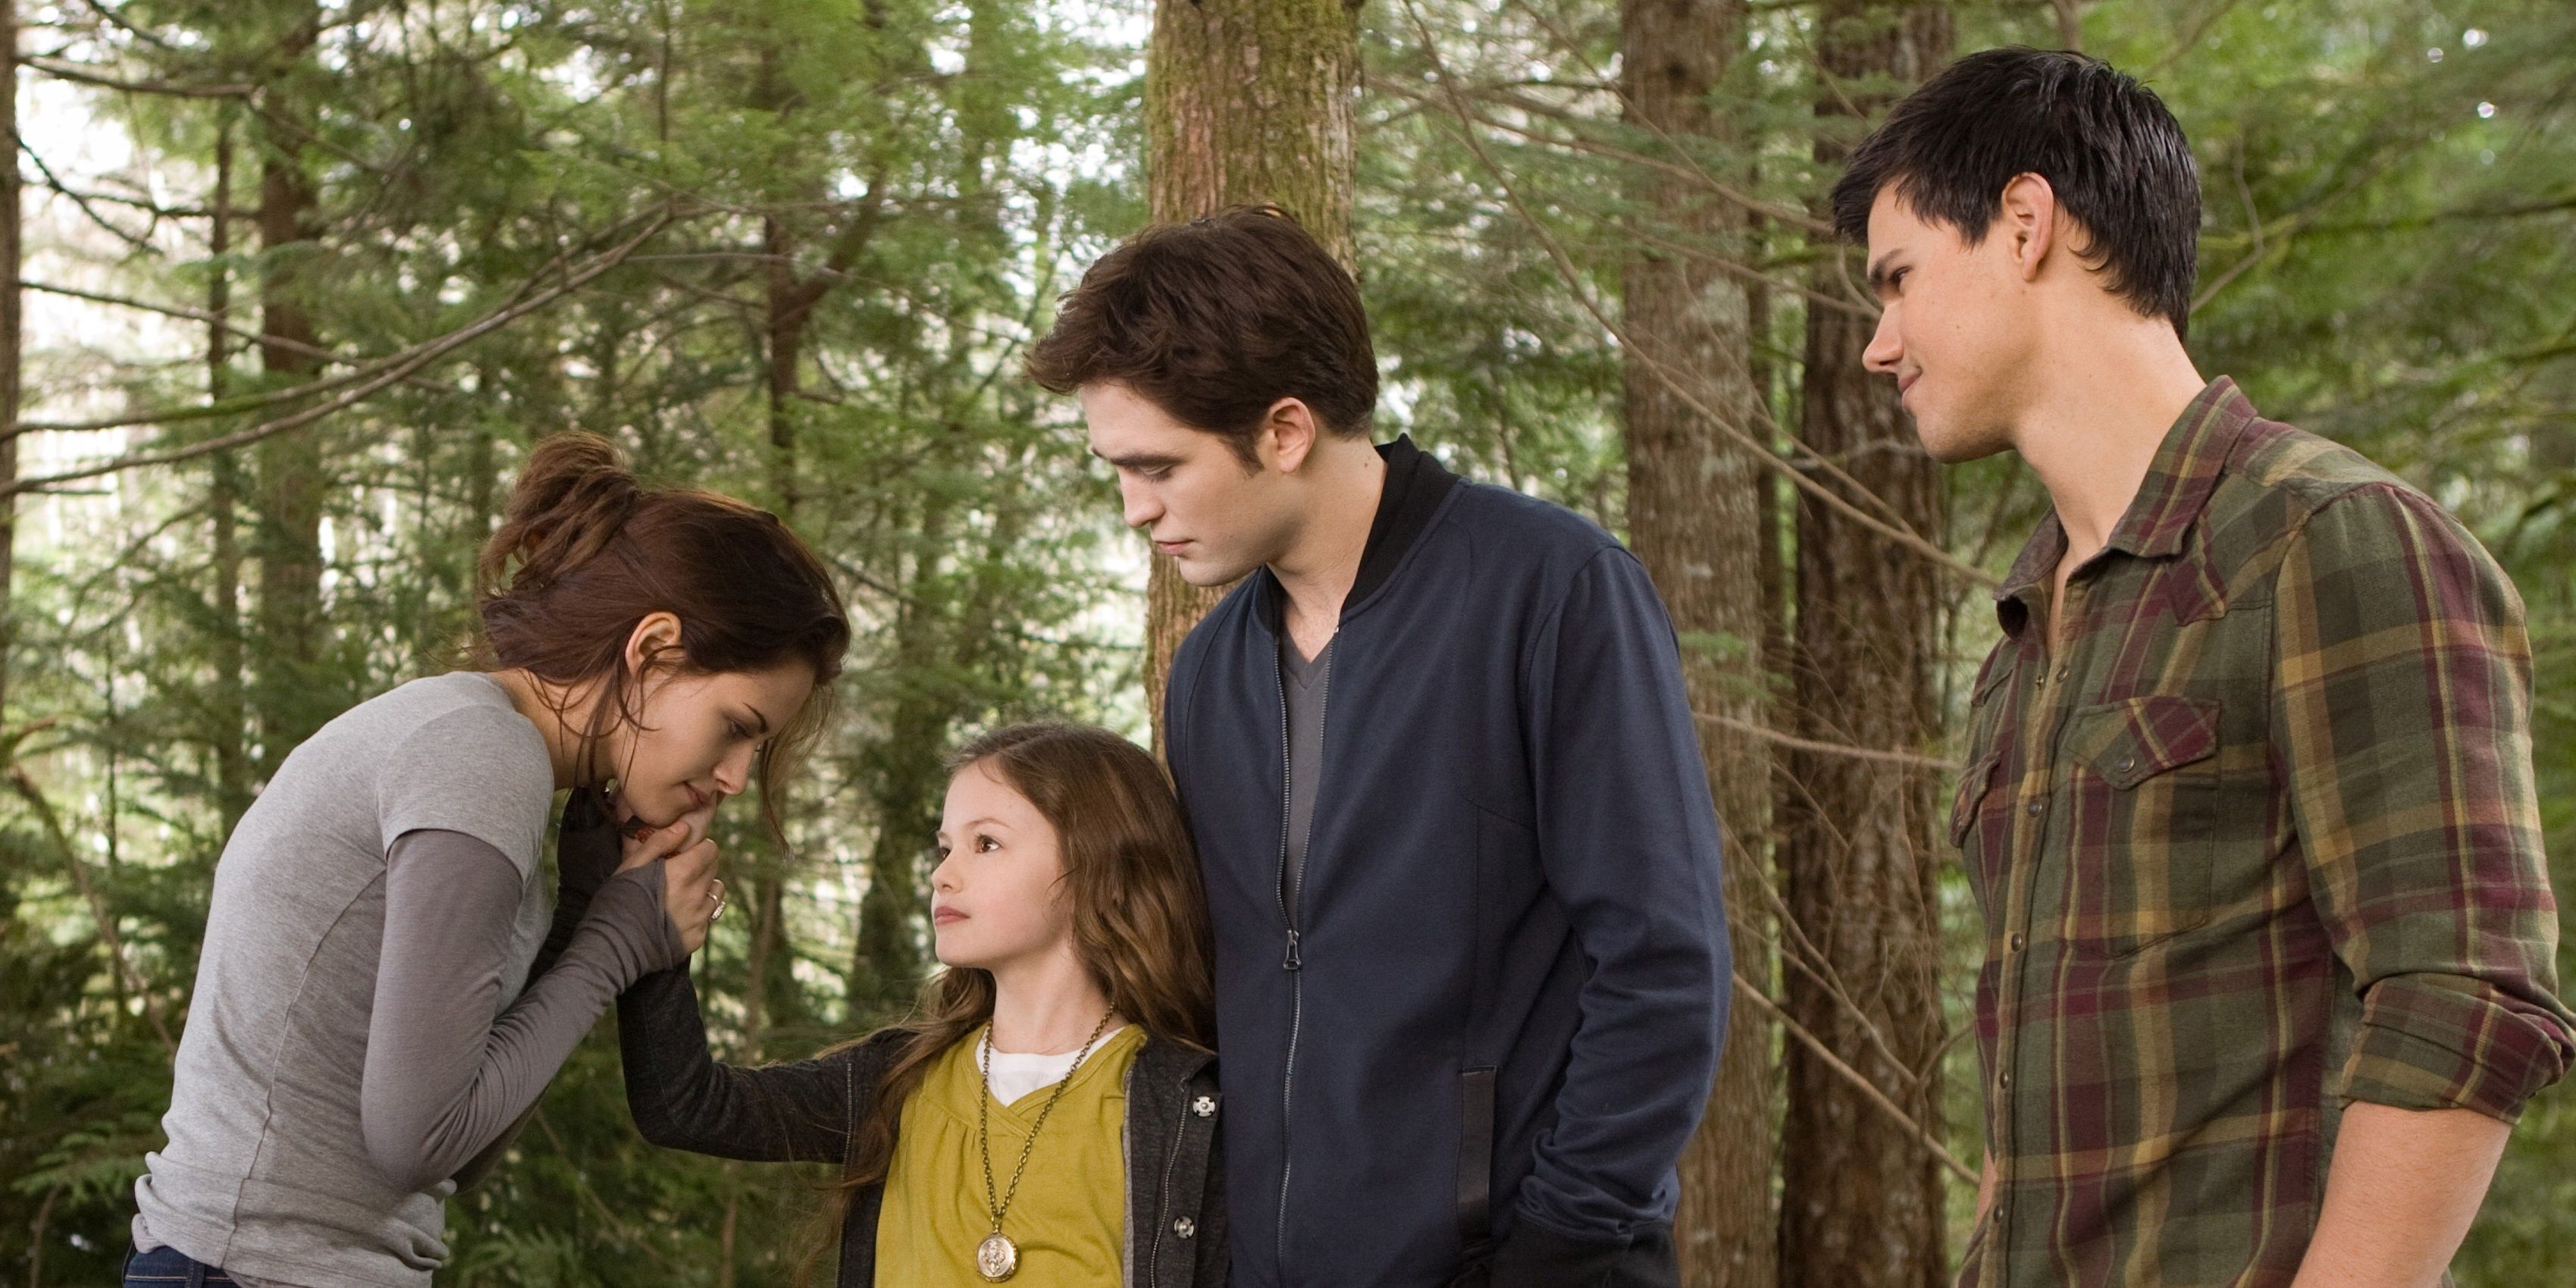 Bella holds Renesmee's hand, while Edward and Jacob look in Breaking Dawn.